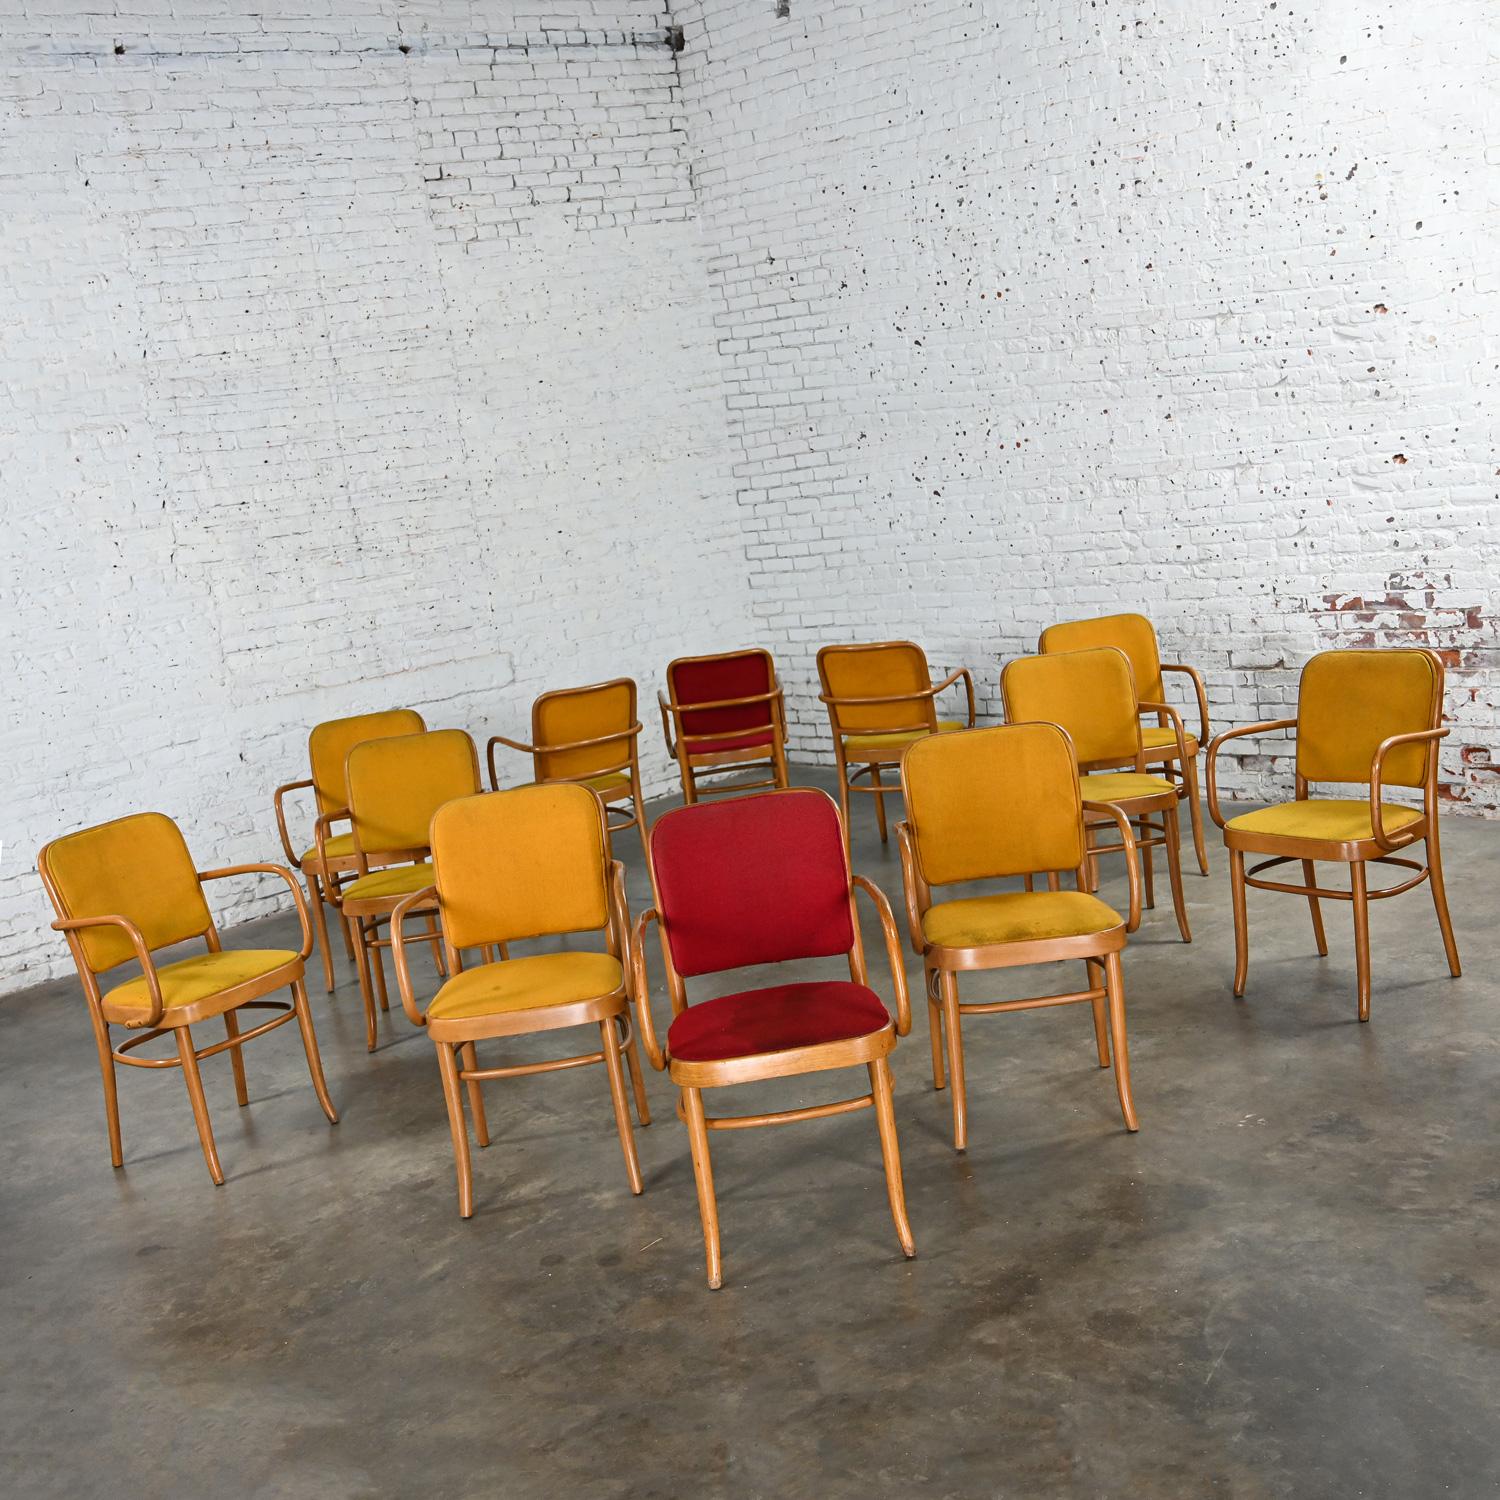 Wonderful vintage Bauhaus beech bentwood frame Thonet Josef Hoffman Prague 811 style armed dining chairs by Falcon Products Inc., Set of 12. Beautiful condition, keeping in mind that these are vintage and not new so will have signs of use and wear